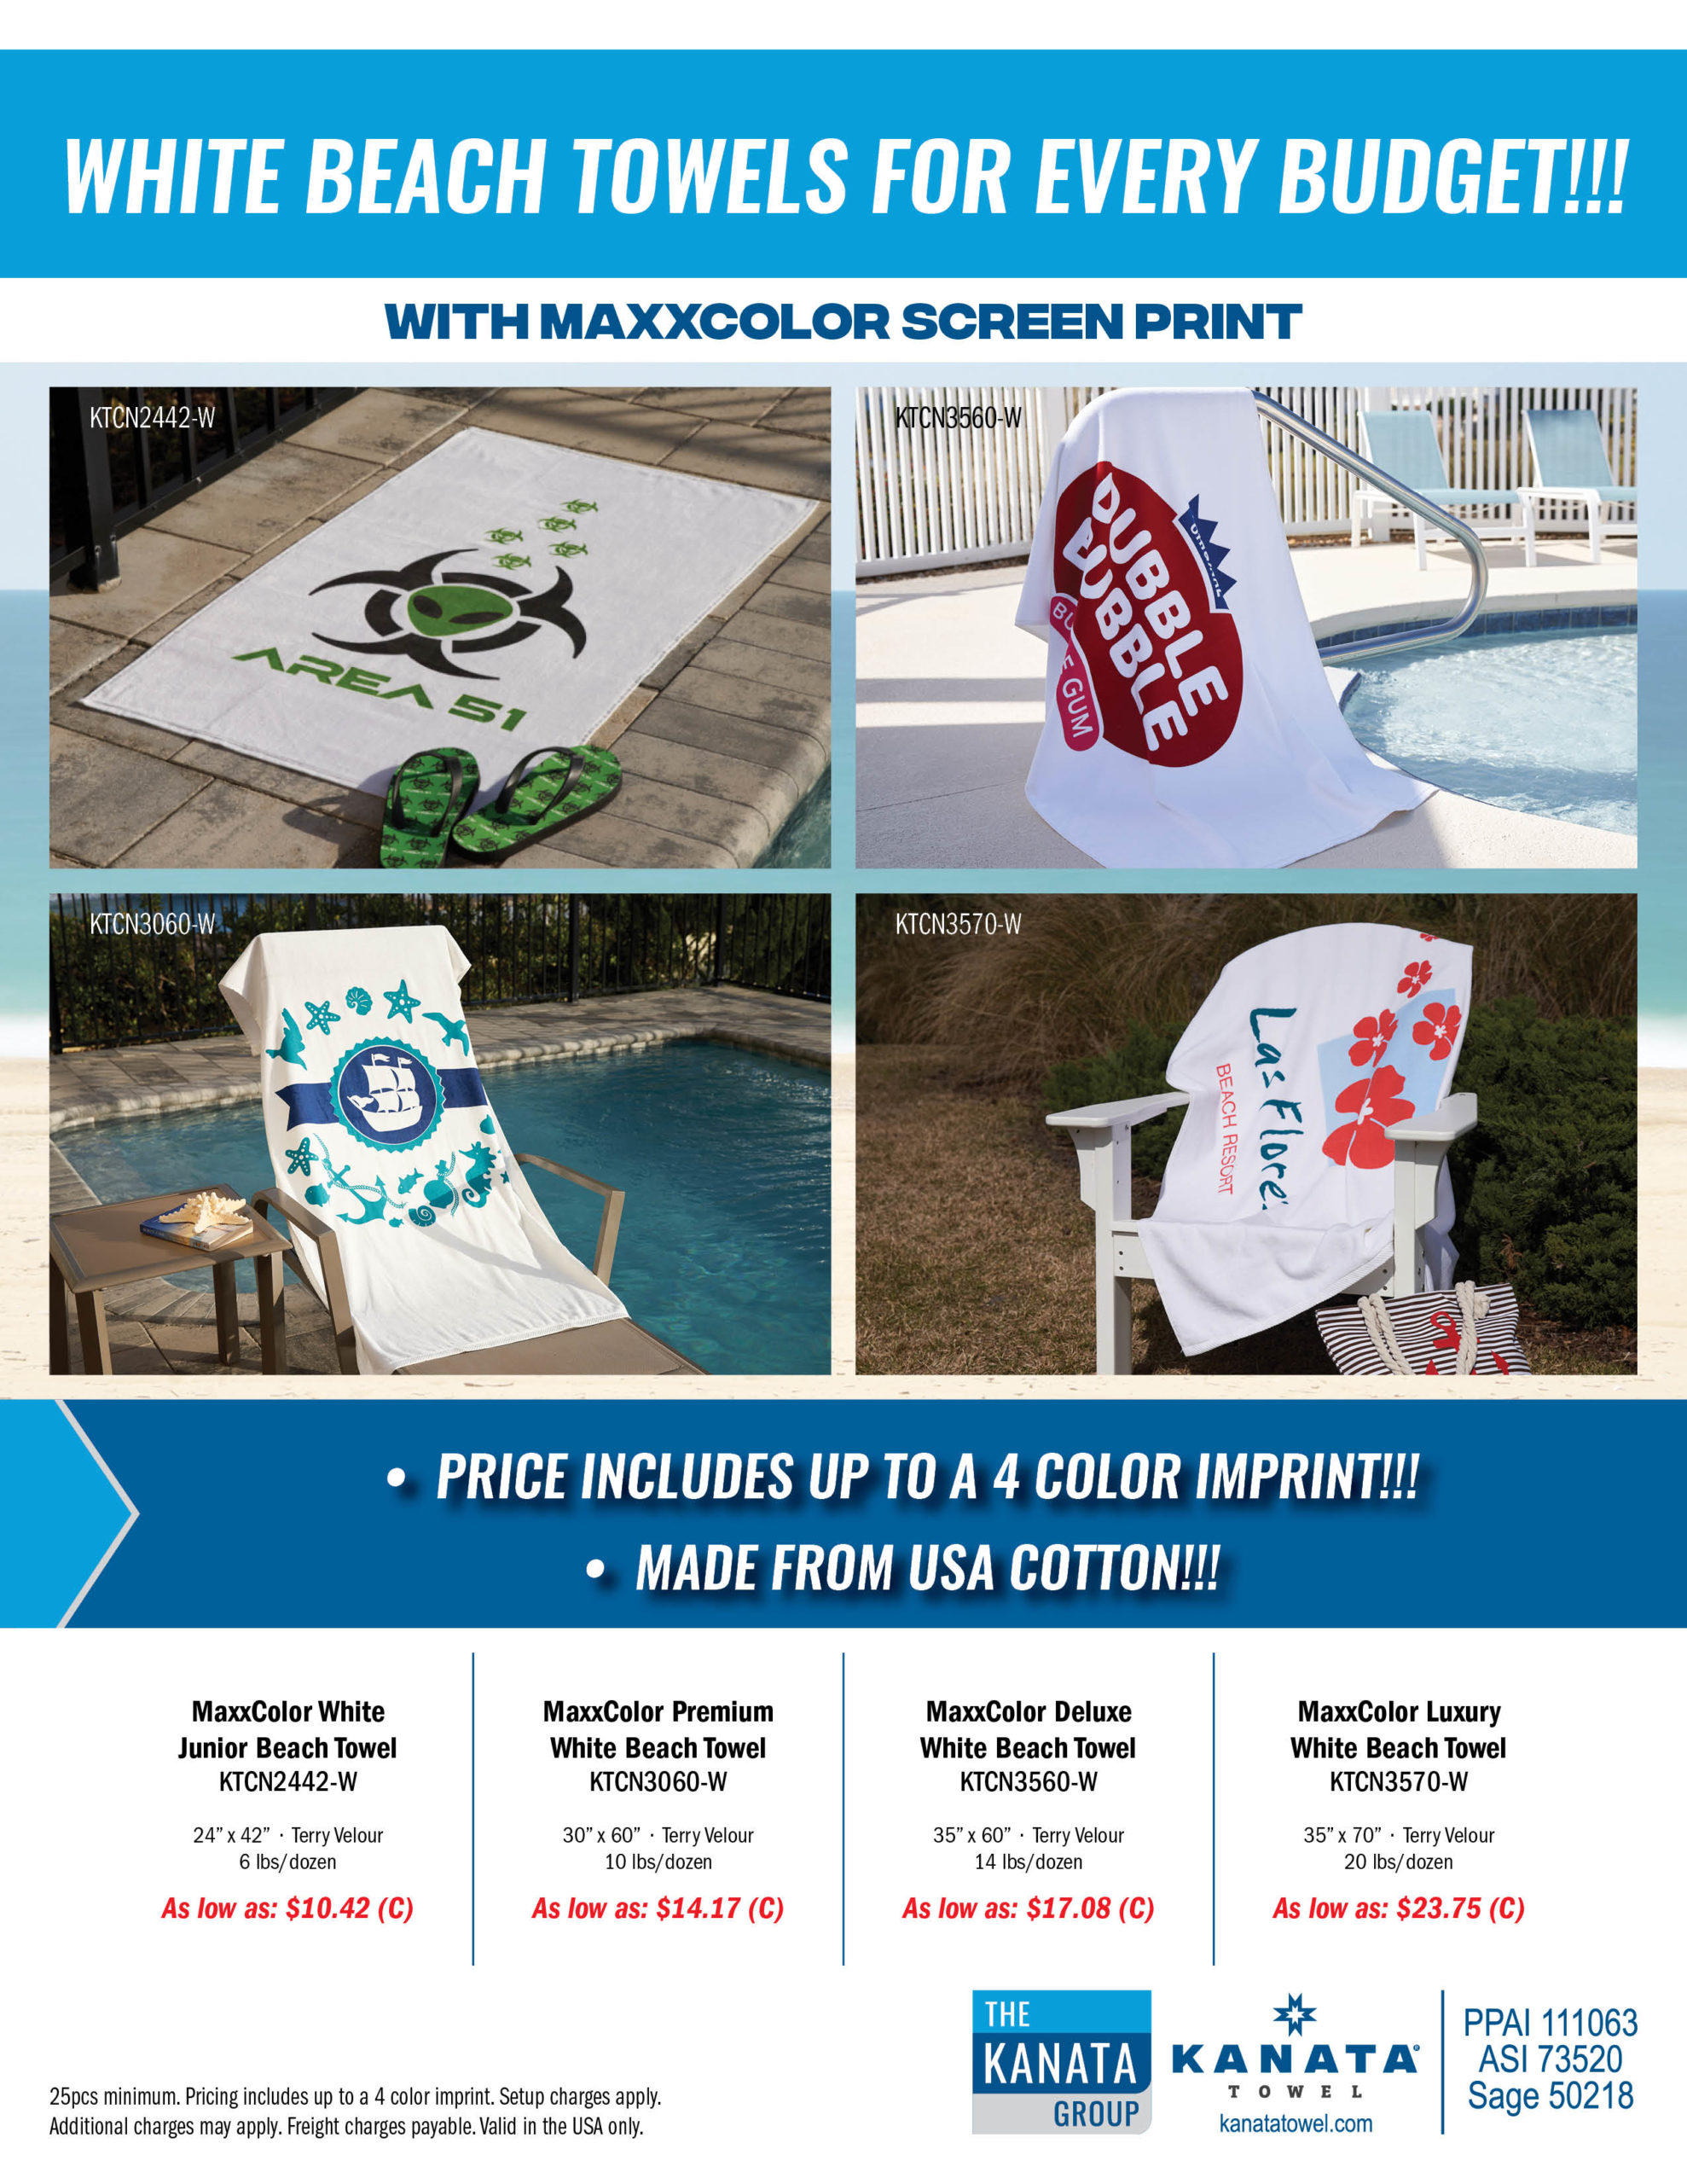 White Beach Towels For Every Budget!